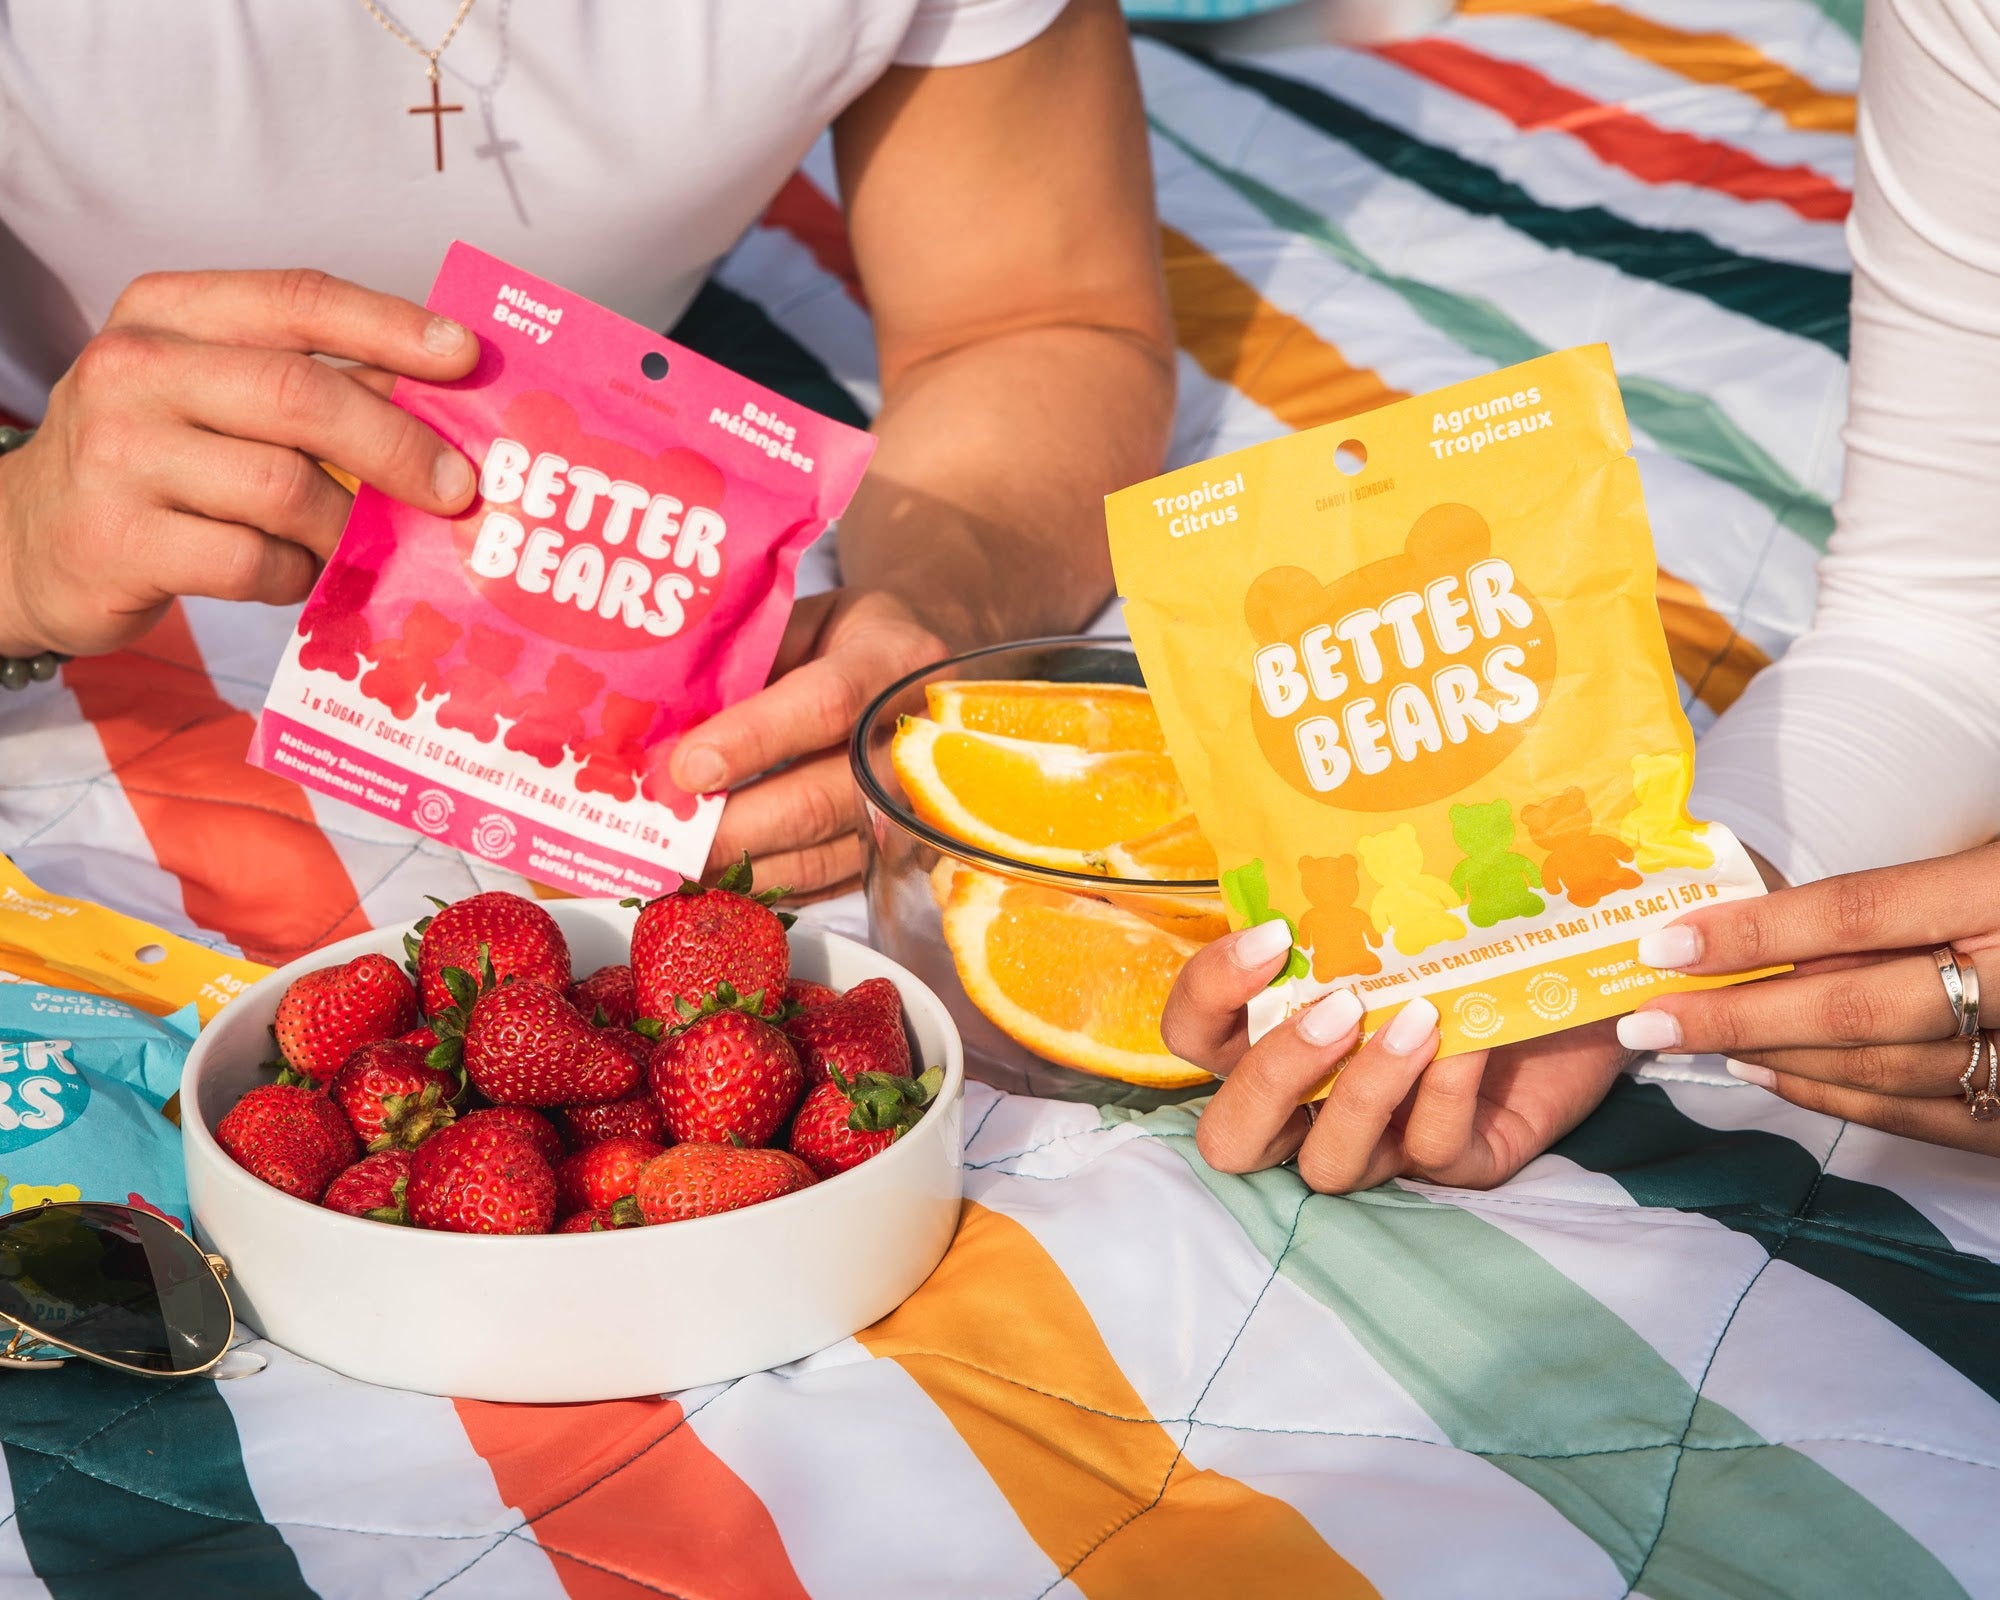 Better Bears - Healthy Snacks - Mixed Berry and Tropical Citrus Gummy Bears